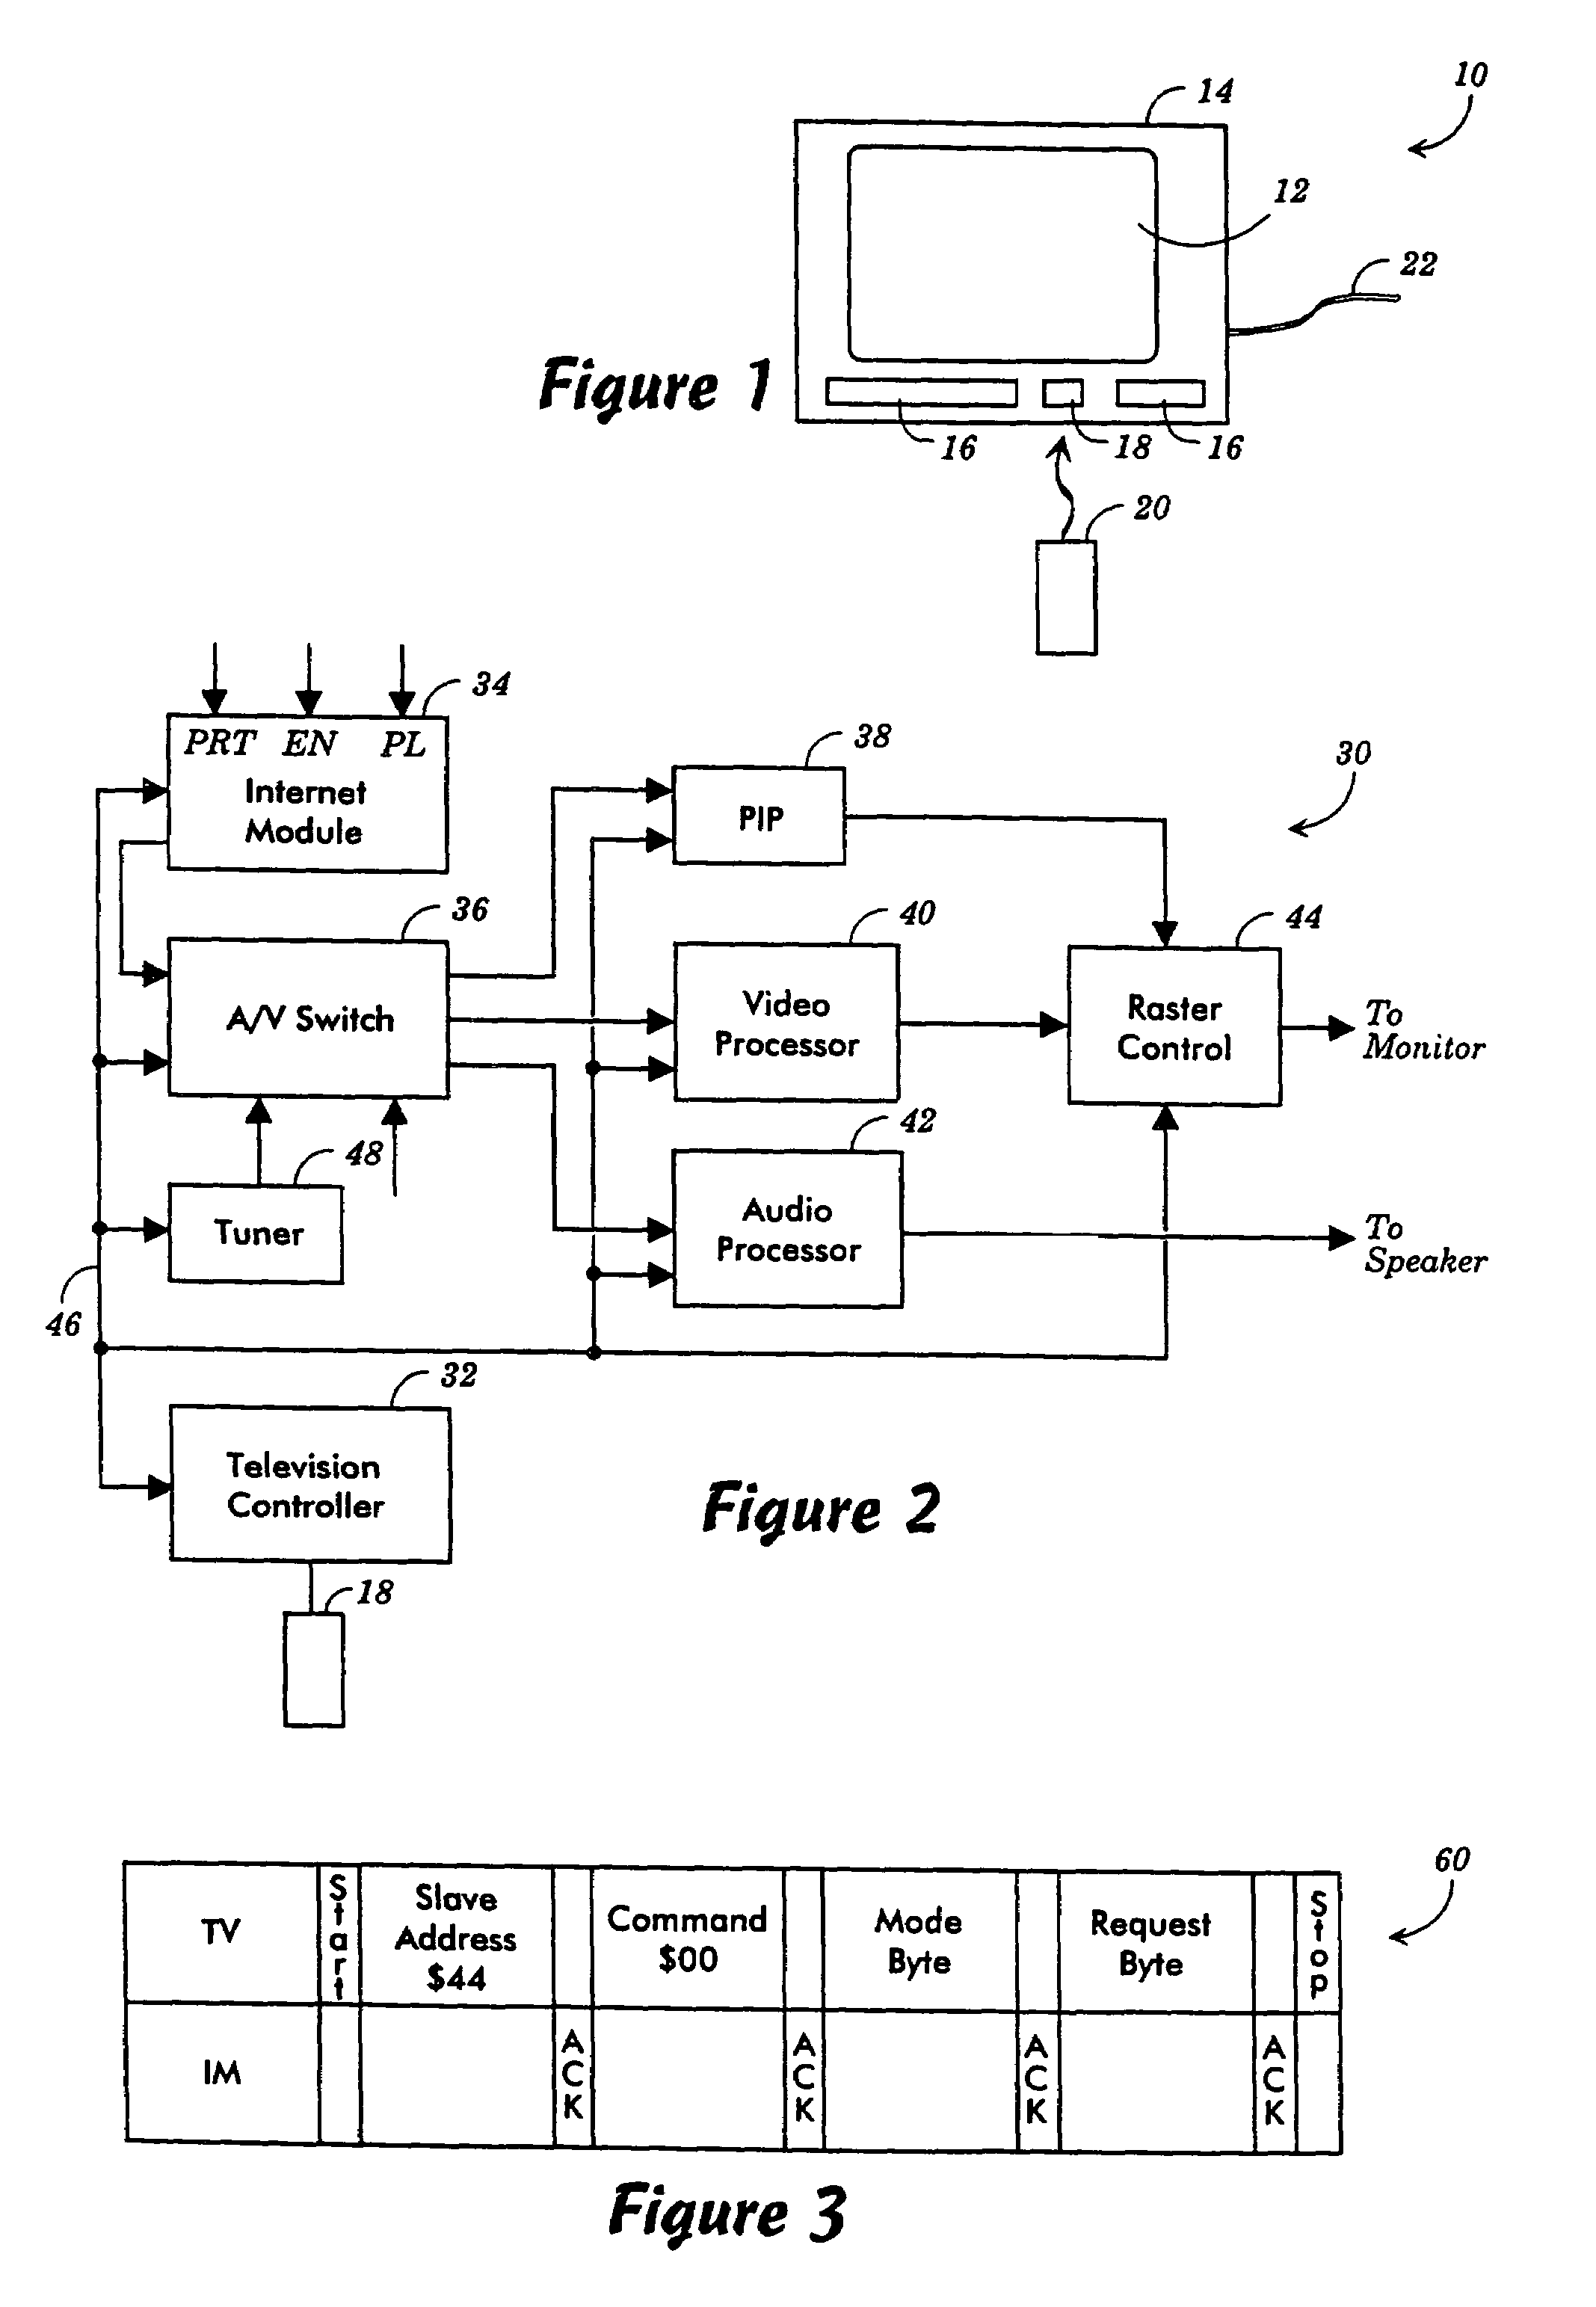 Transferring information between an internet module and TV controller of a web TV